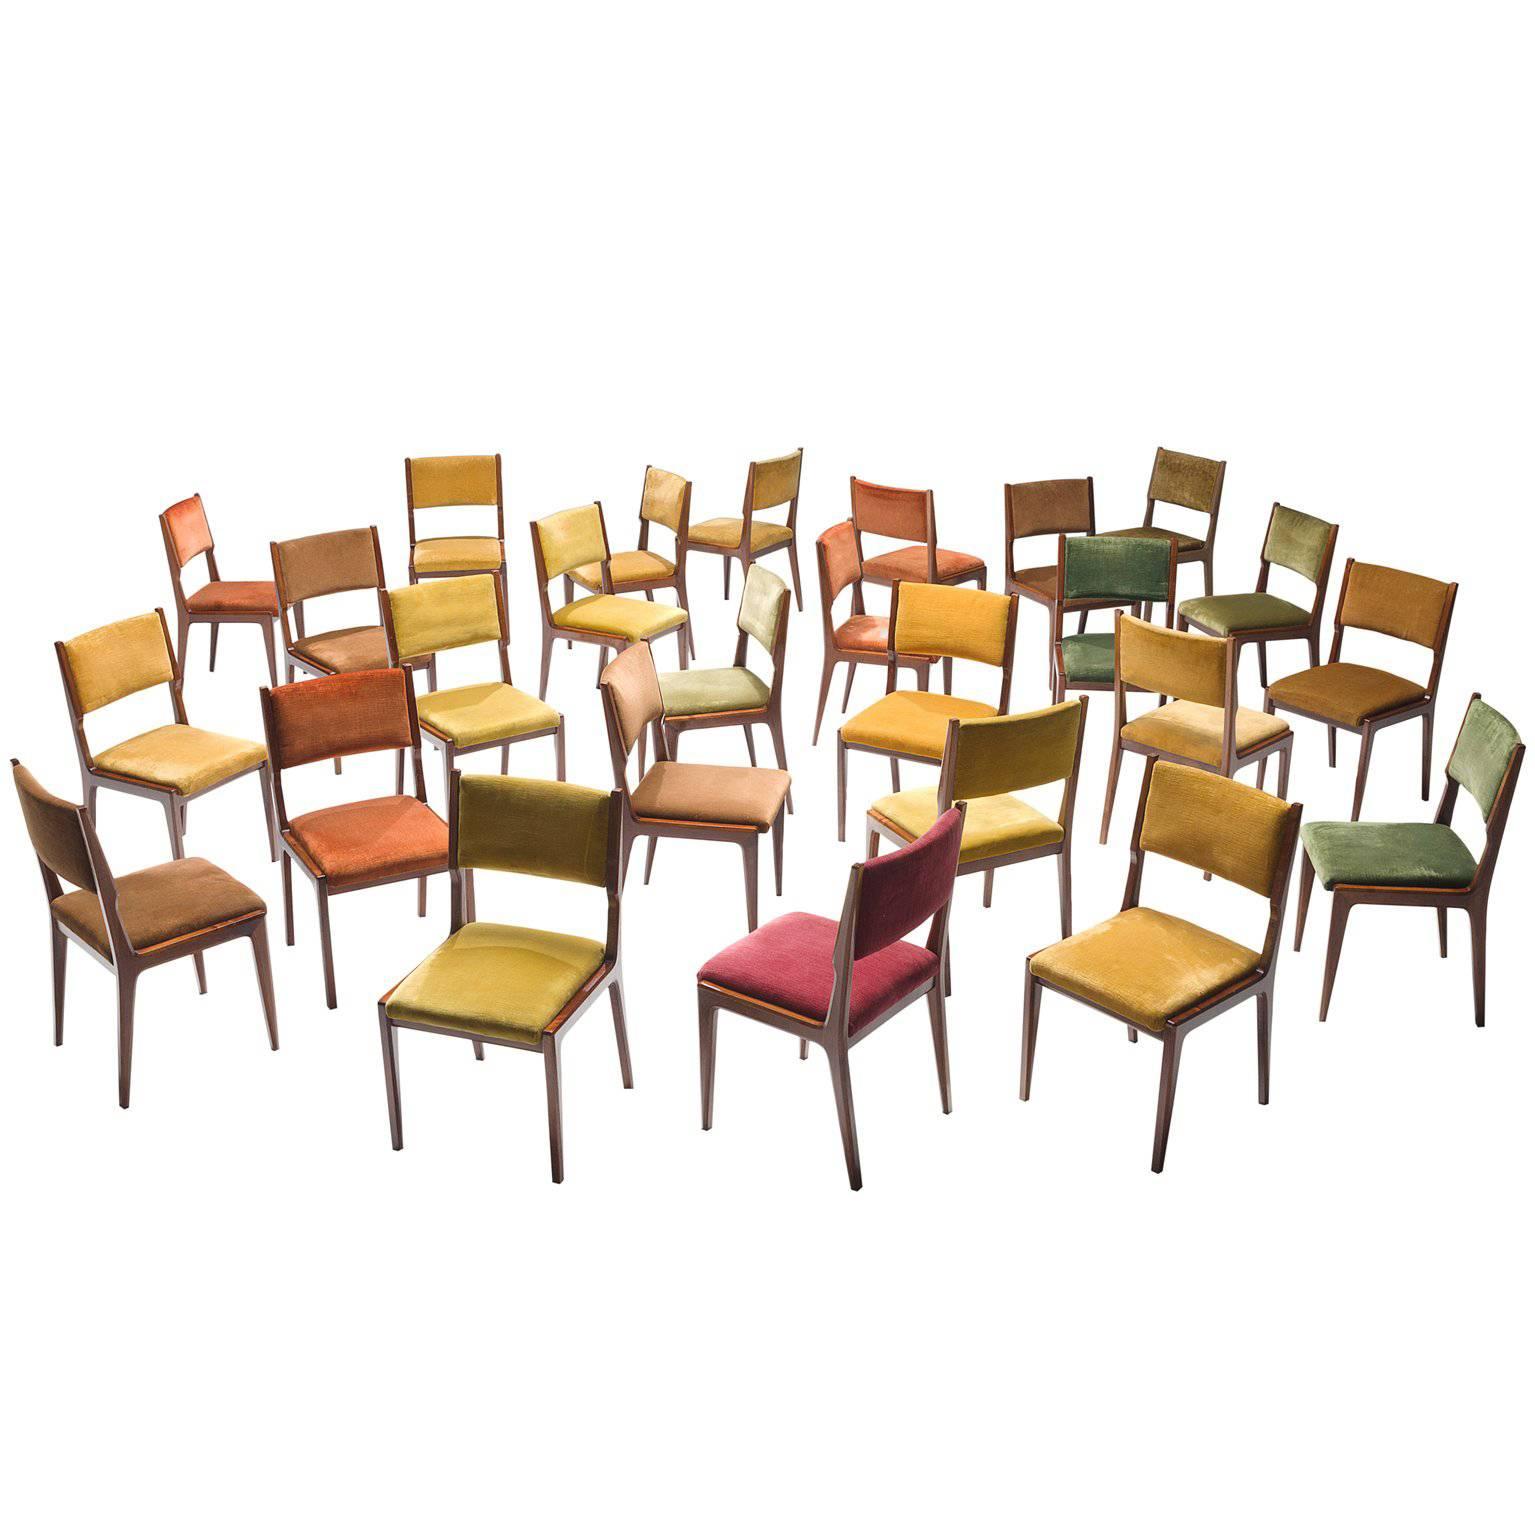 Large Set of Colorful Italian Dining Chairs